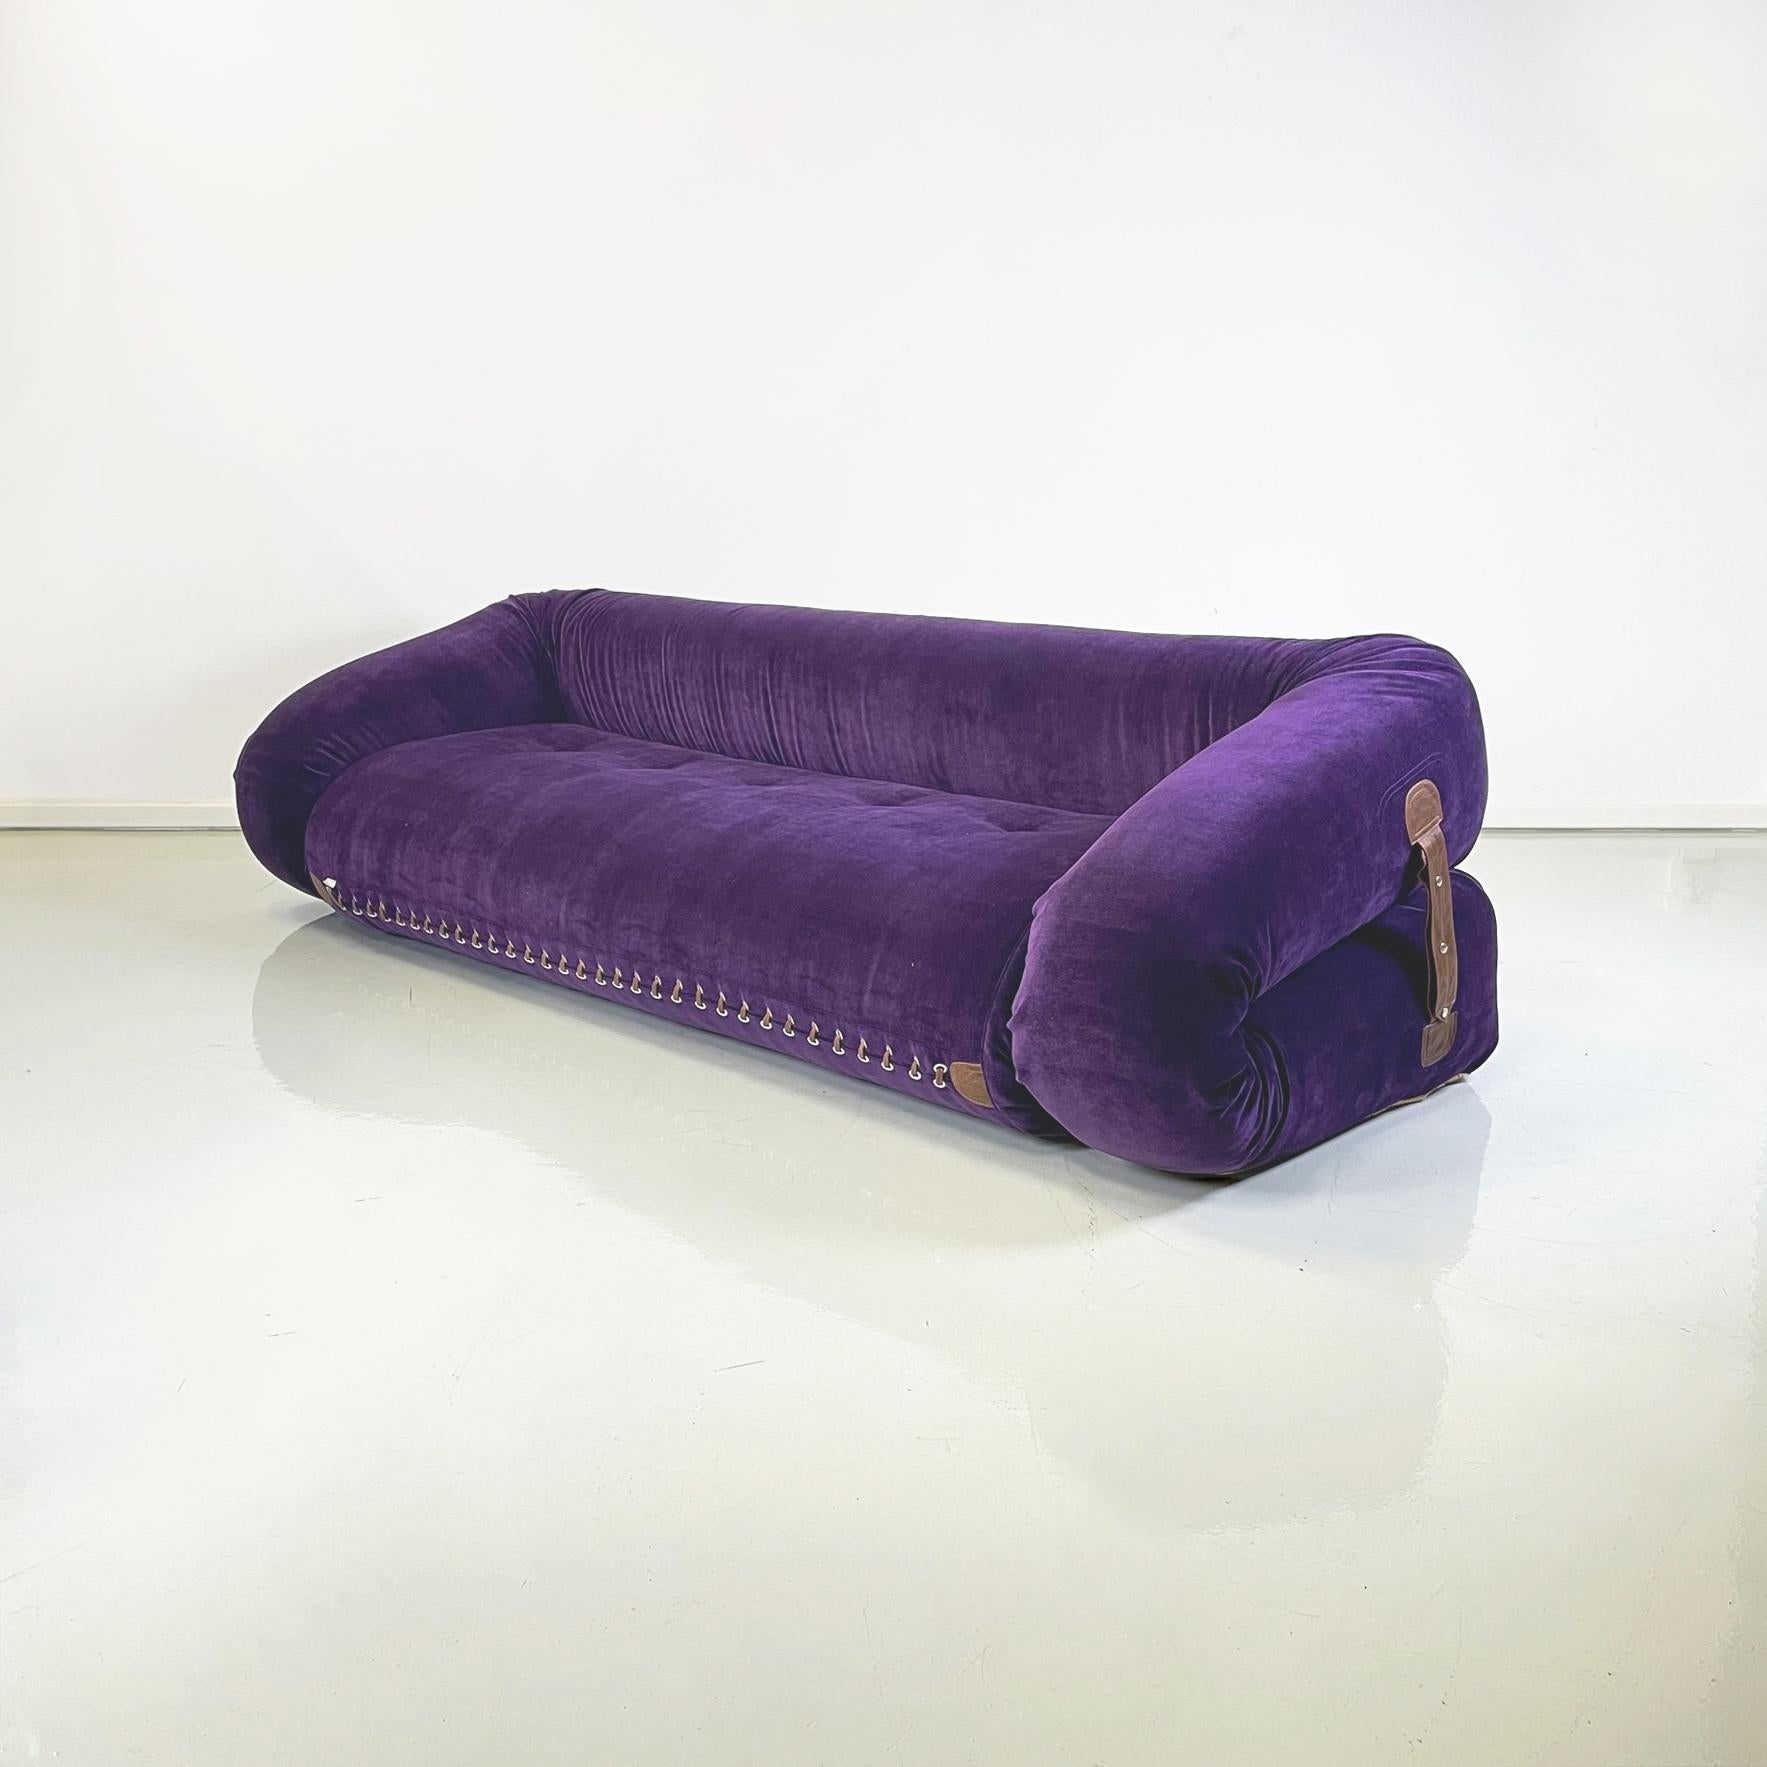 Italian modern Purple velvet sofa bed mod. Anfibio by Alessandro Becchi for Giovannetti, 1970s
Sofa bed mod. Anfibio in aubergine purple velvet. The sofa has a rectangular seat with metal buttons. On the sides there are several brown leather straps